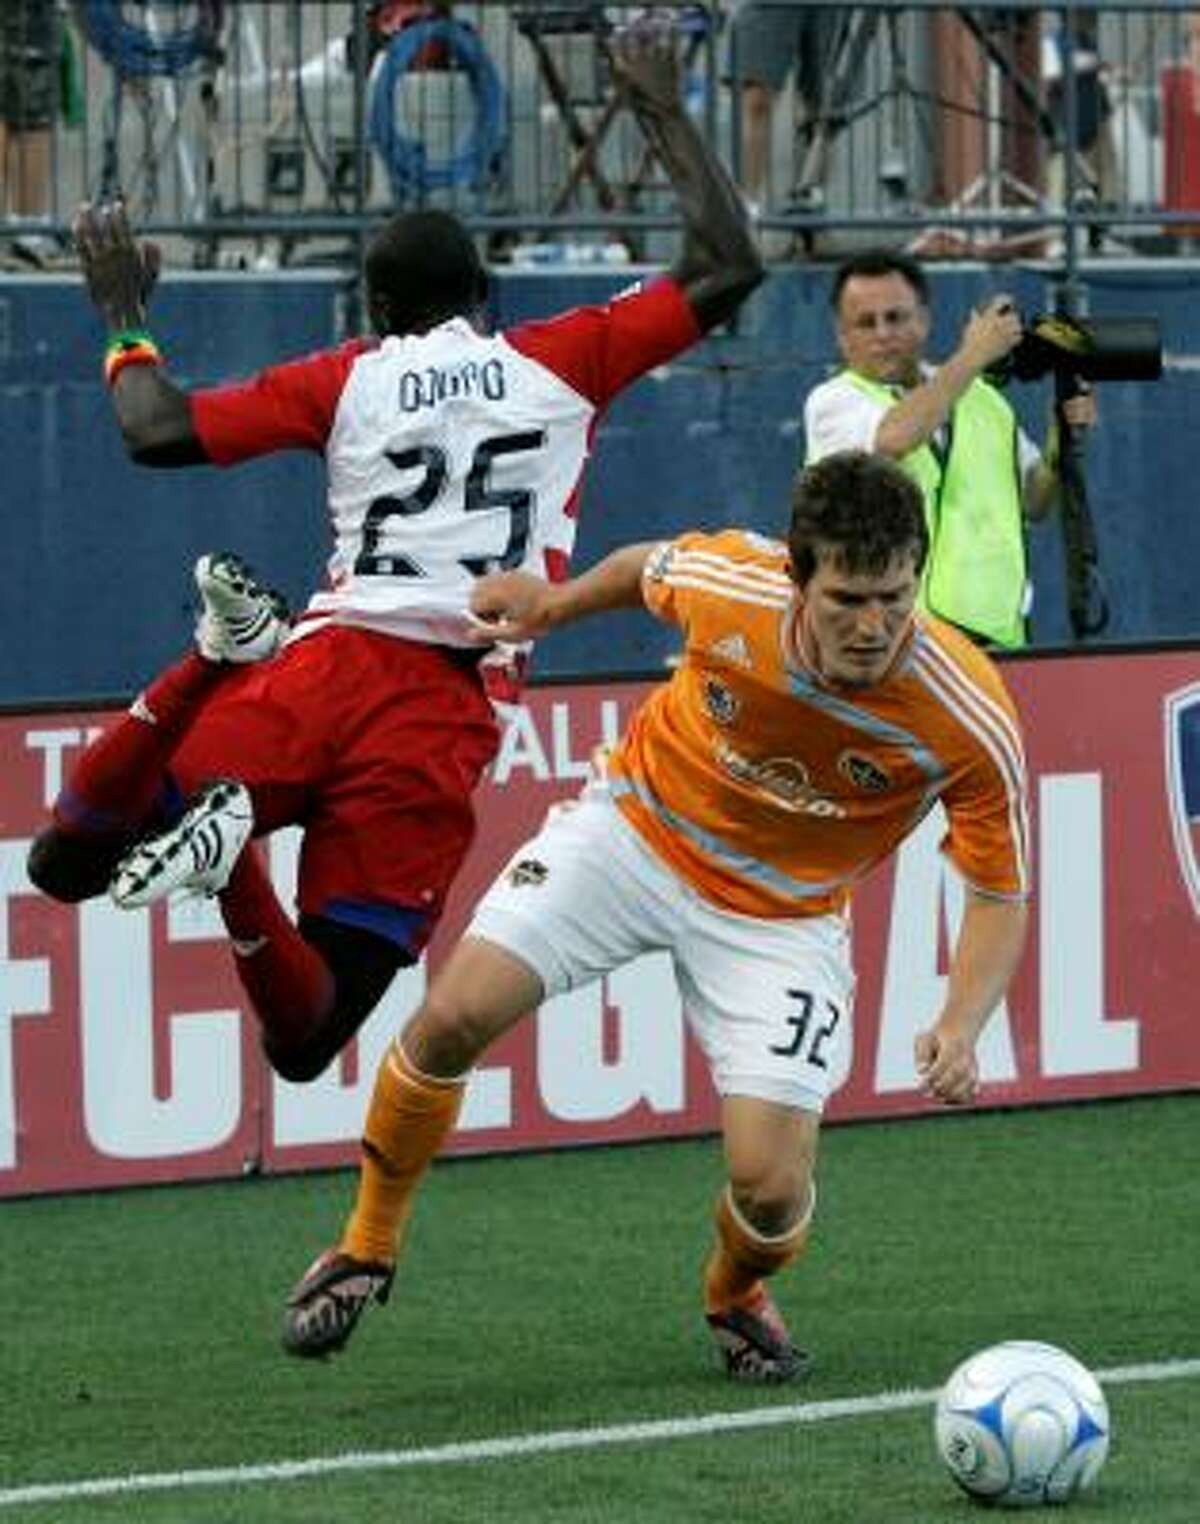 FC Dallas forward Dominic Oduro, left, is knocked out of bounds by Dynamo defender Bobby Boswell as they compete for a loose ball in the first half.